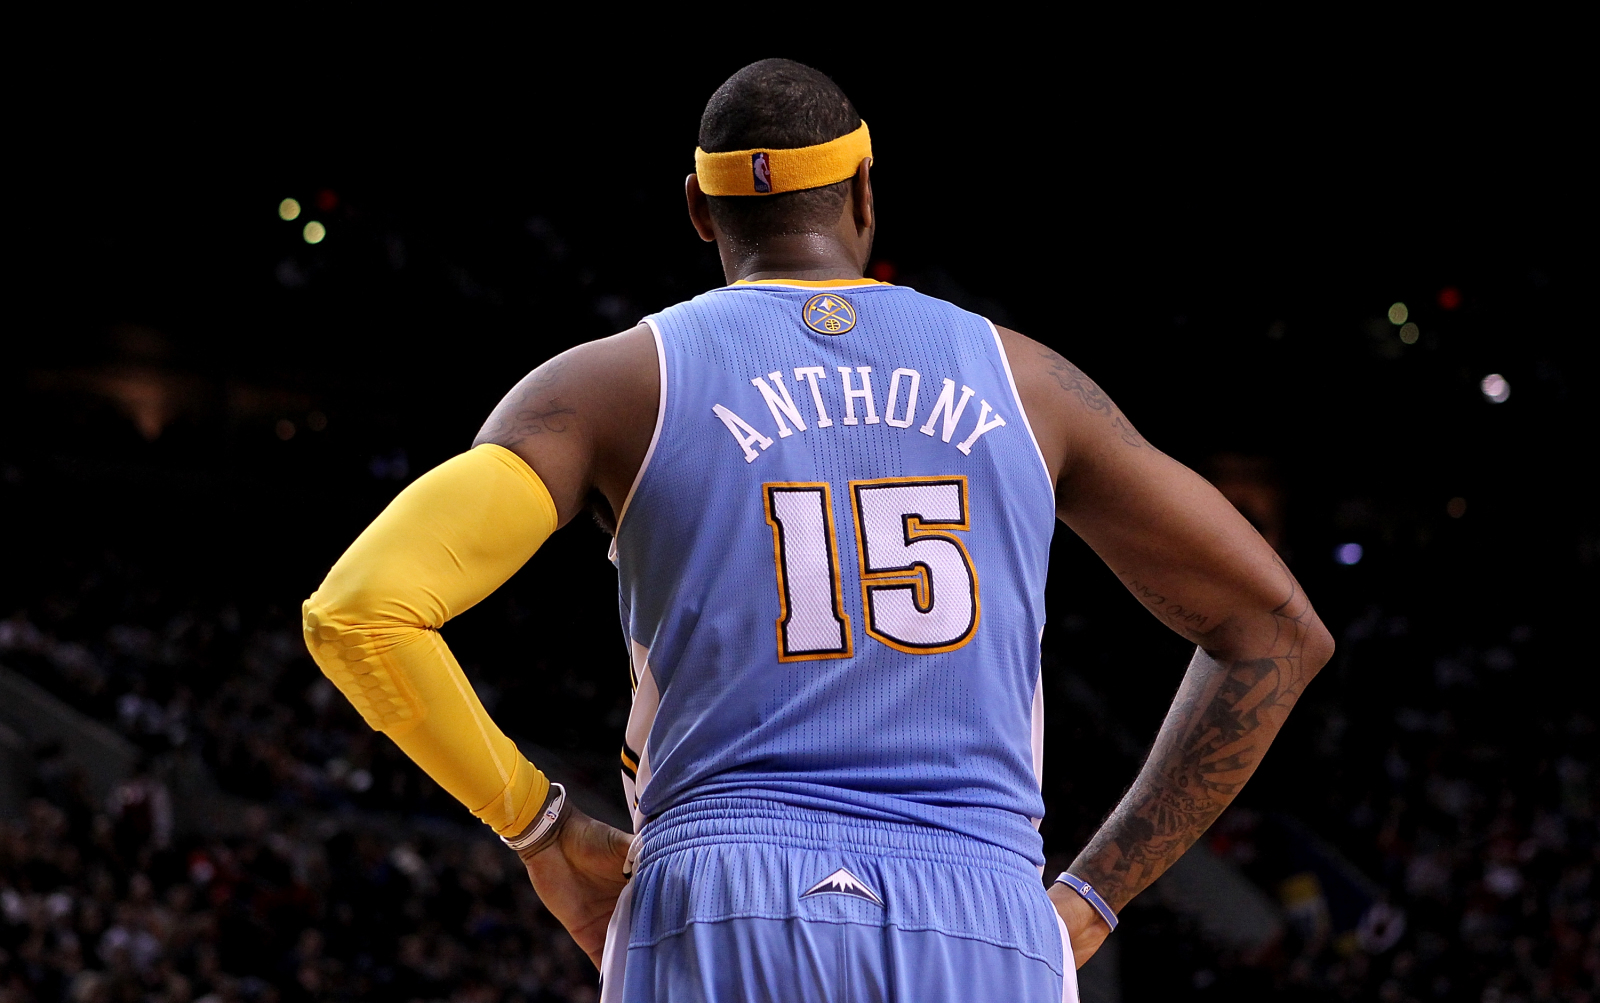 Jokic didn't turn his back on Denver - Nuggets fans can't decide if they  want Carmelo Anthony's jersey retired